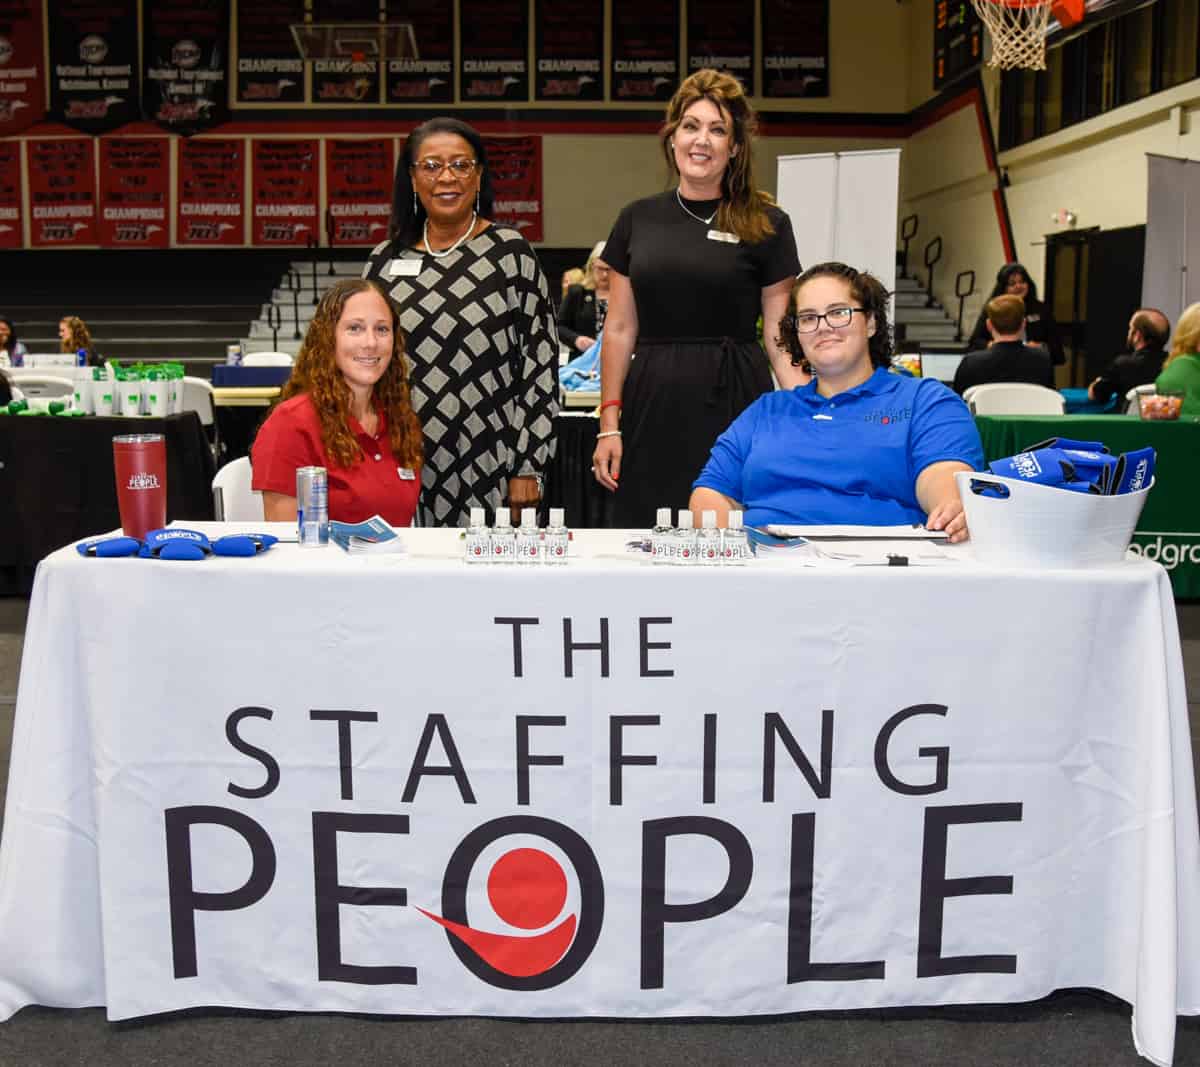 Pictured are SGTC Director of Career Services Cynthia Carter (standing, left) with (l-r) Hannah Strouf, Nichole Adams, and Priscilla Smith of The Staffing People at a recent hiring event on the SGTC campus.